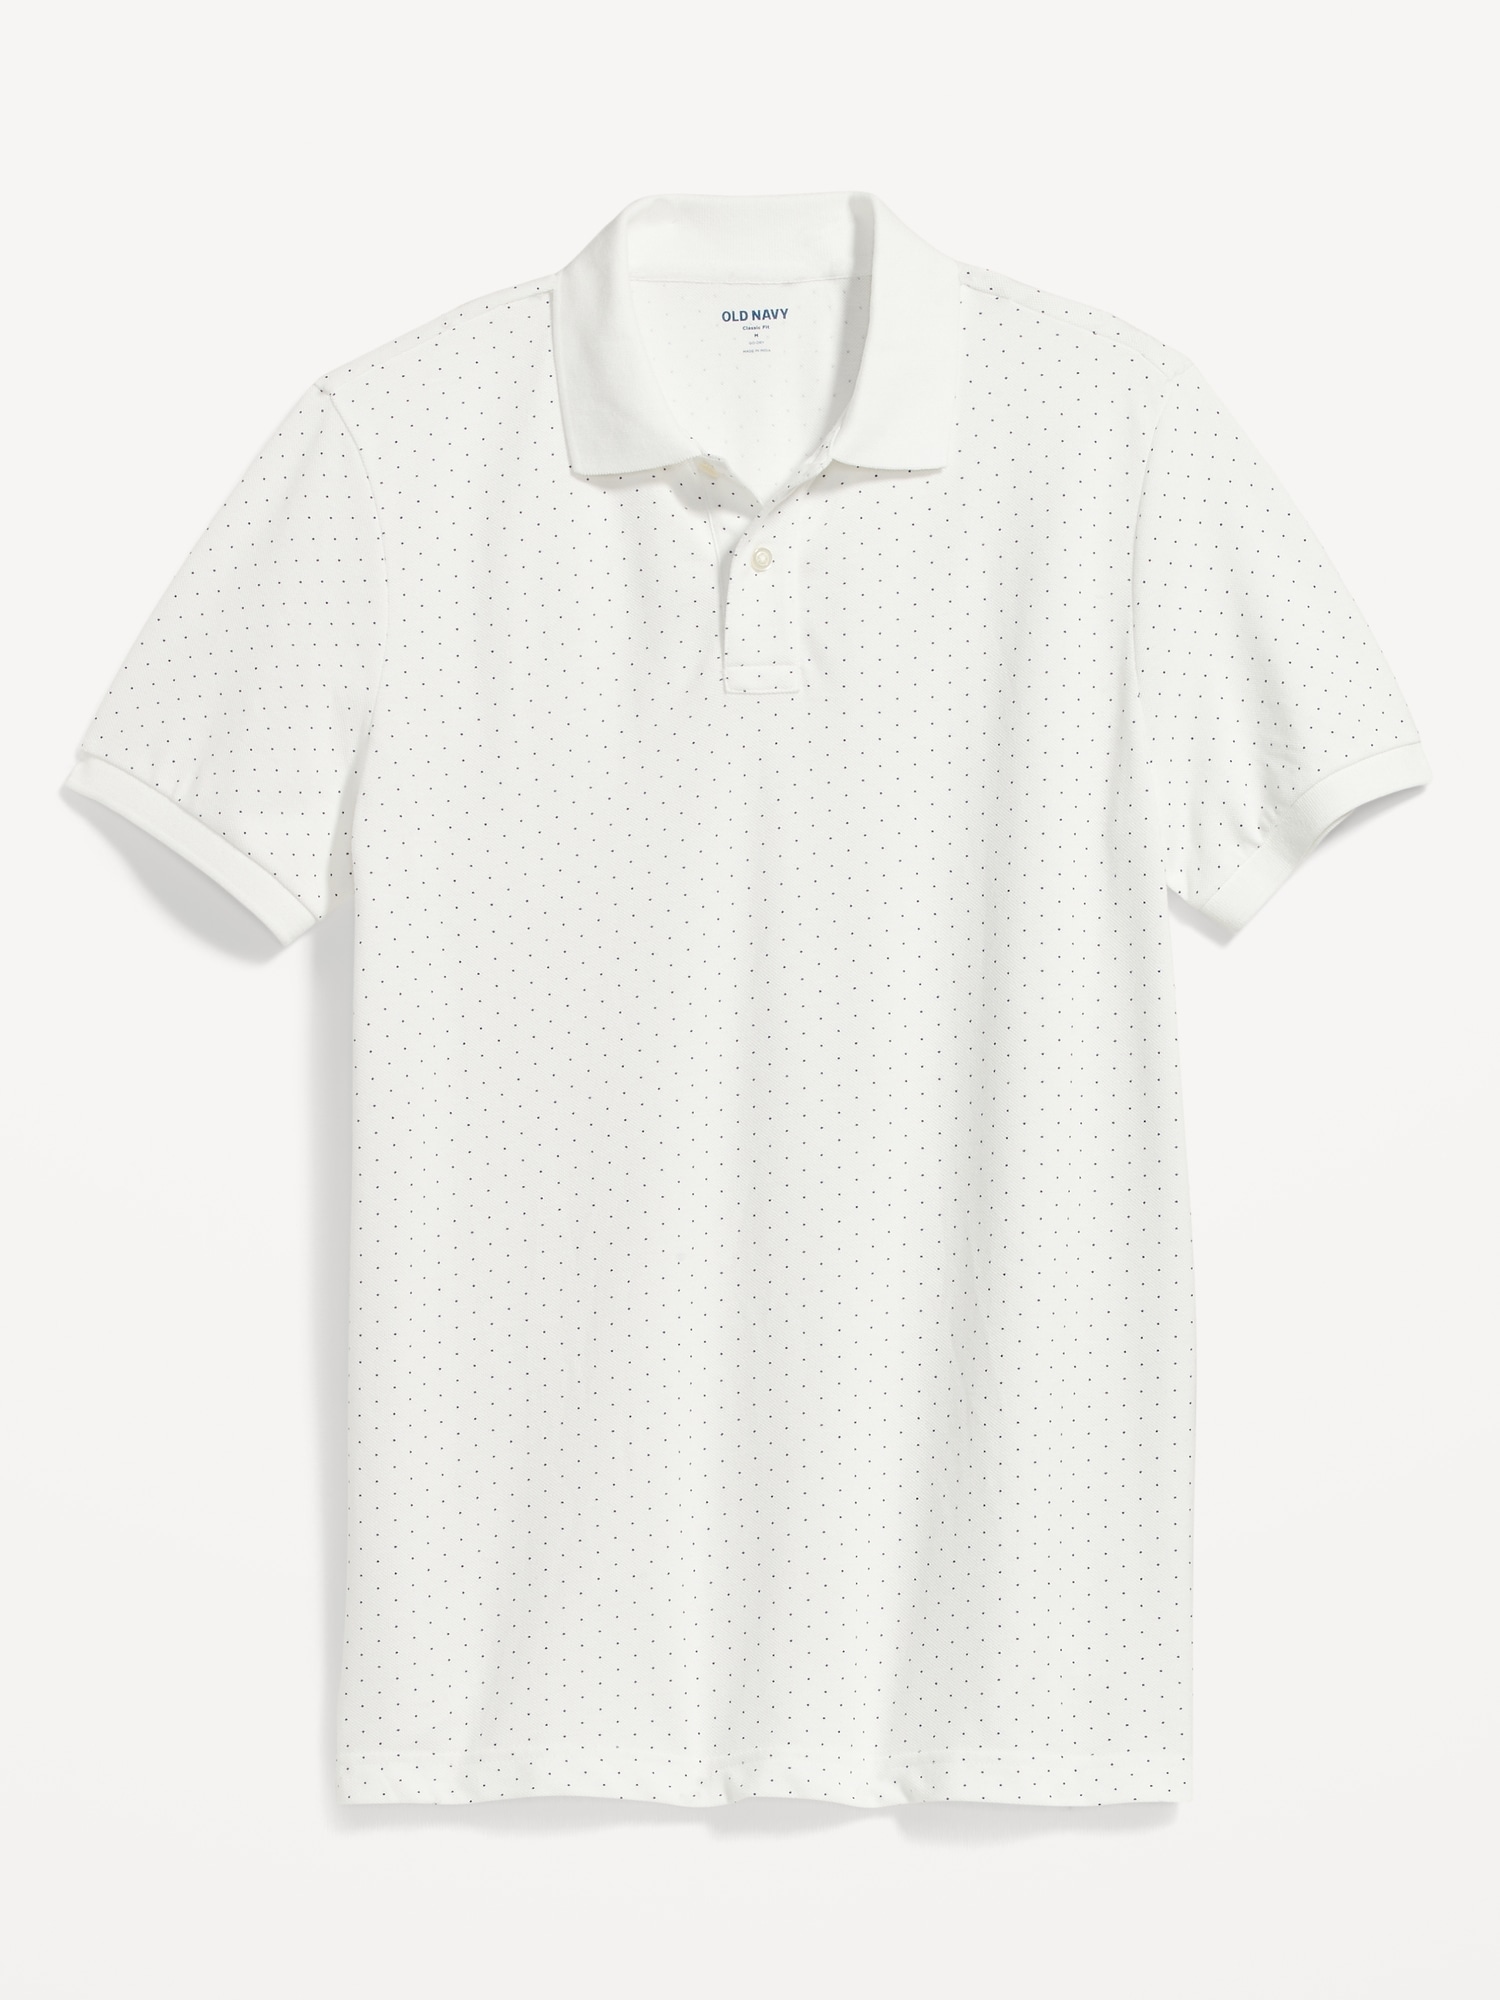 Printed Classic Fit Pique Polo